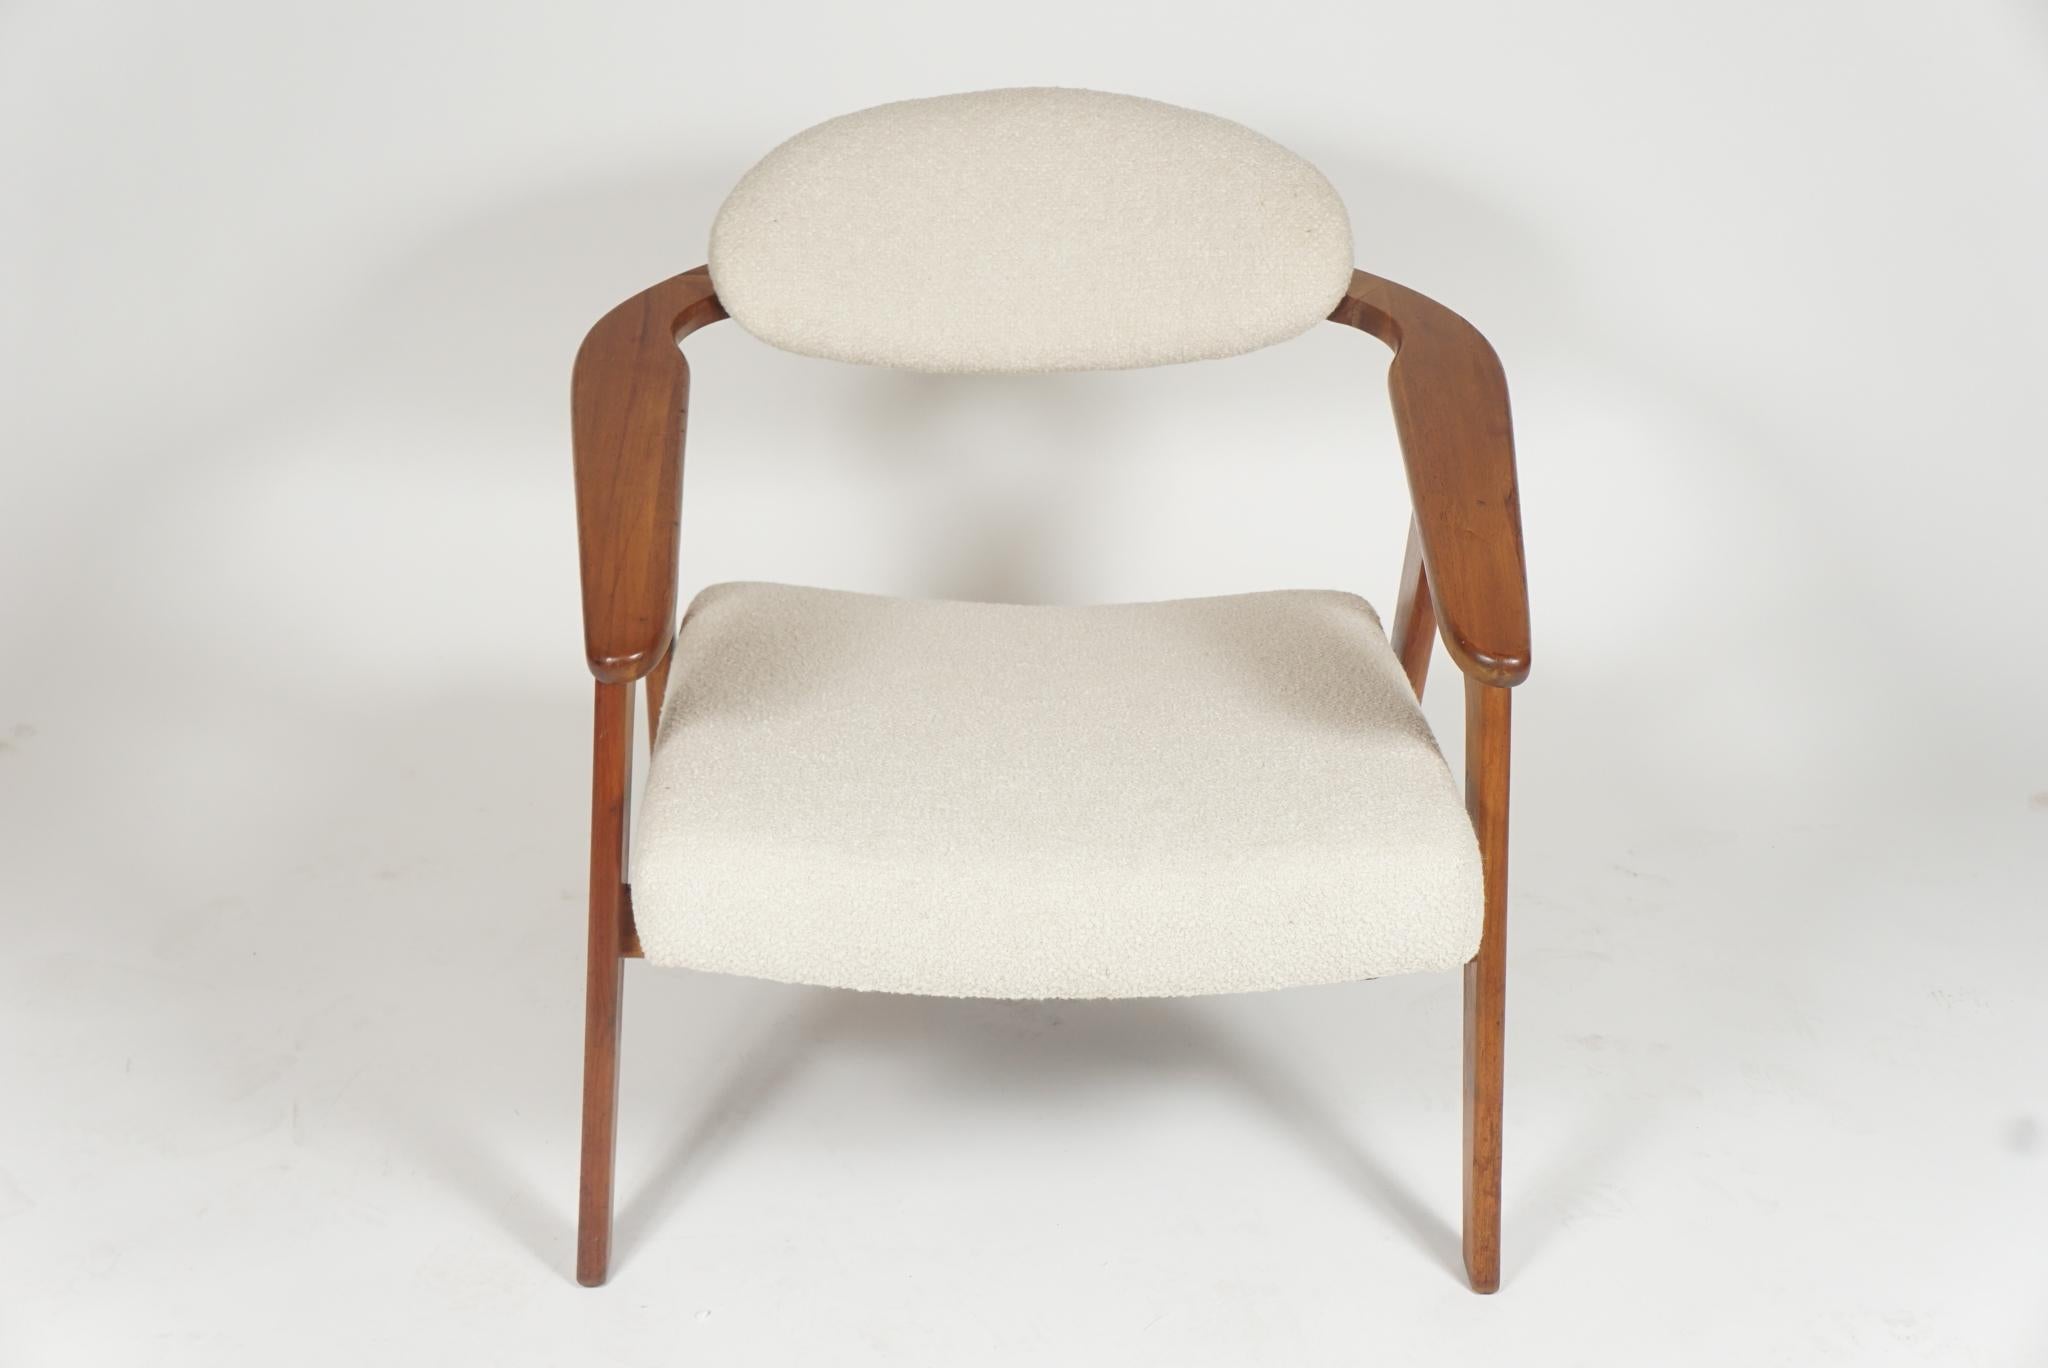 Mid-20th Century Adrian Pearsall Lounge/Captain's Chair for Craft Assoc. model 916-CC in Walnut